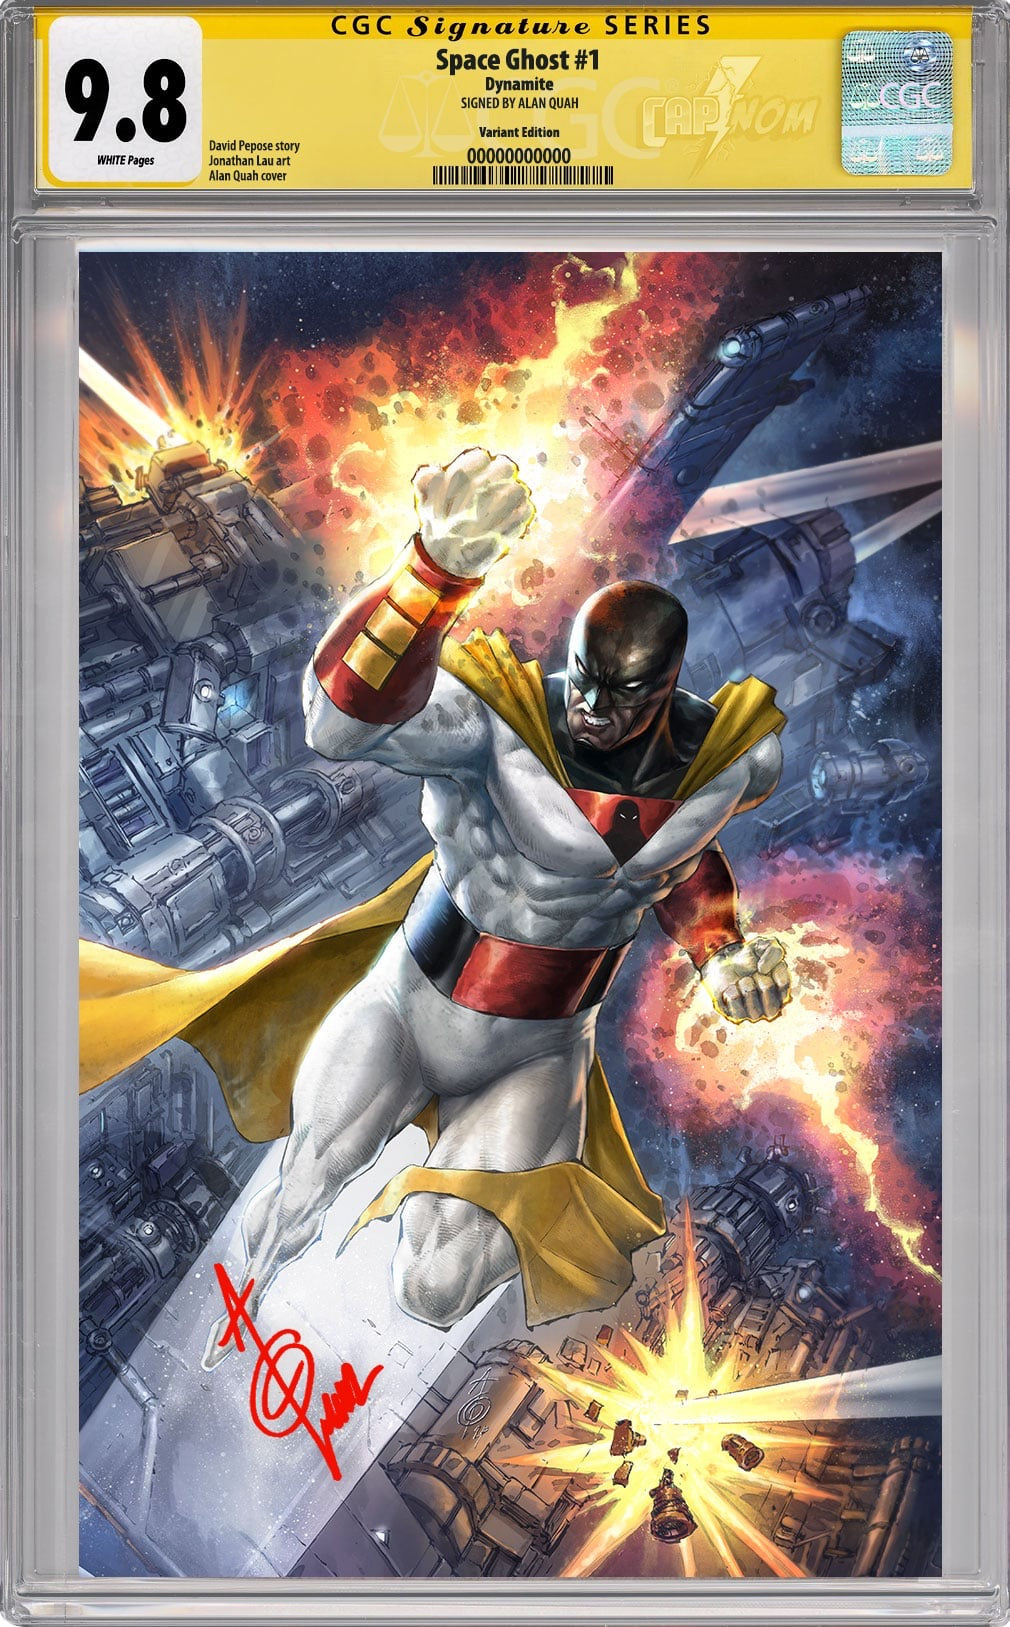 Space Ghost #1 Full Wraparound Virgin Cover CGC SS 9.8 Signed by Alan Quah